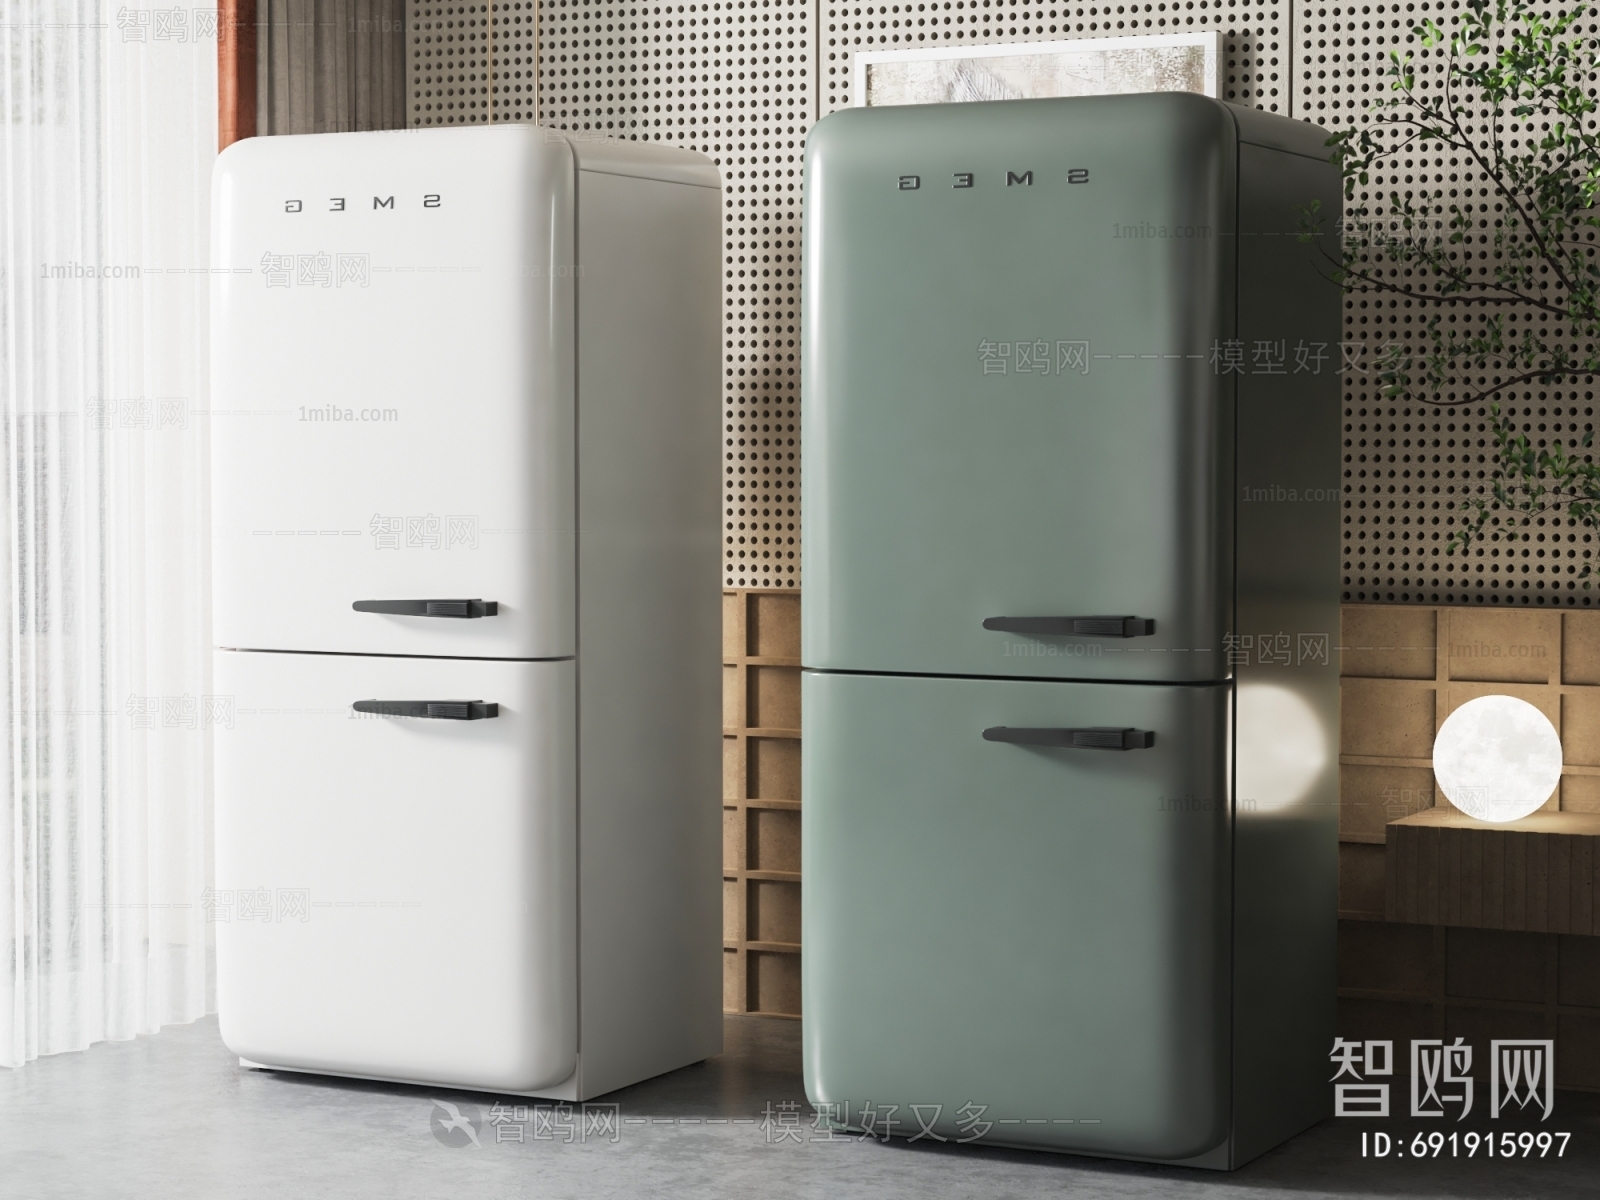 Nordic Style Home Appliance Refrigerator